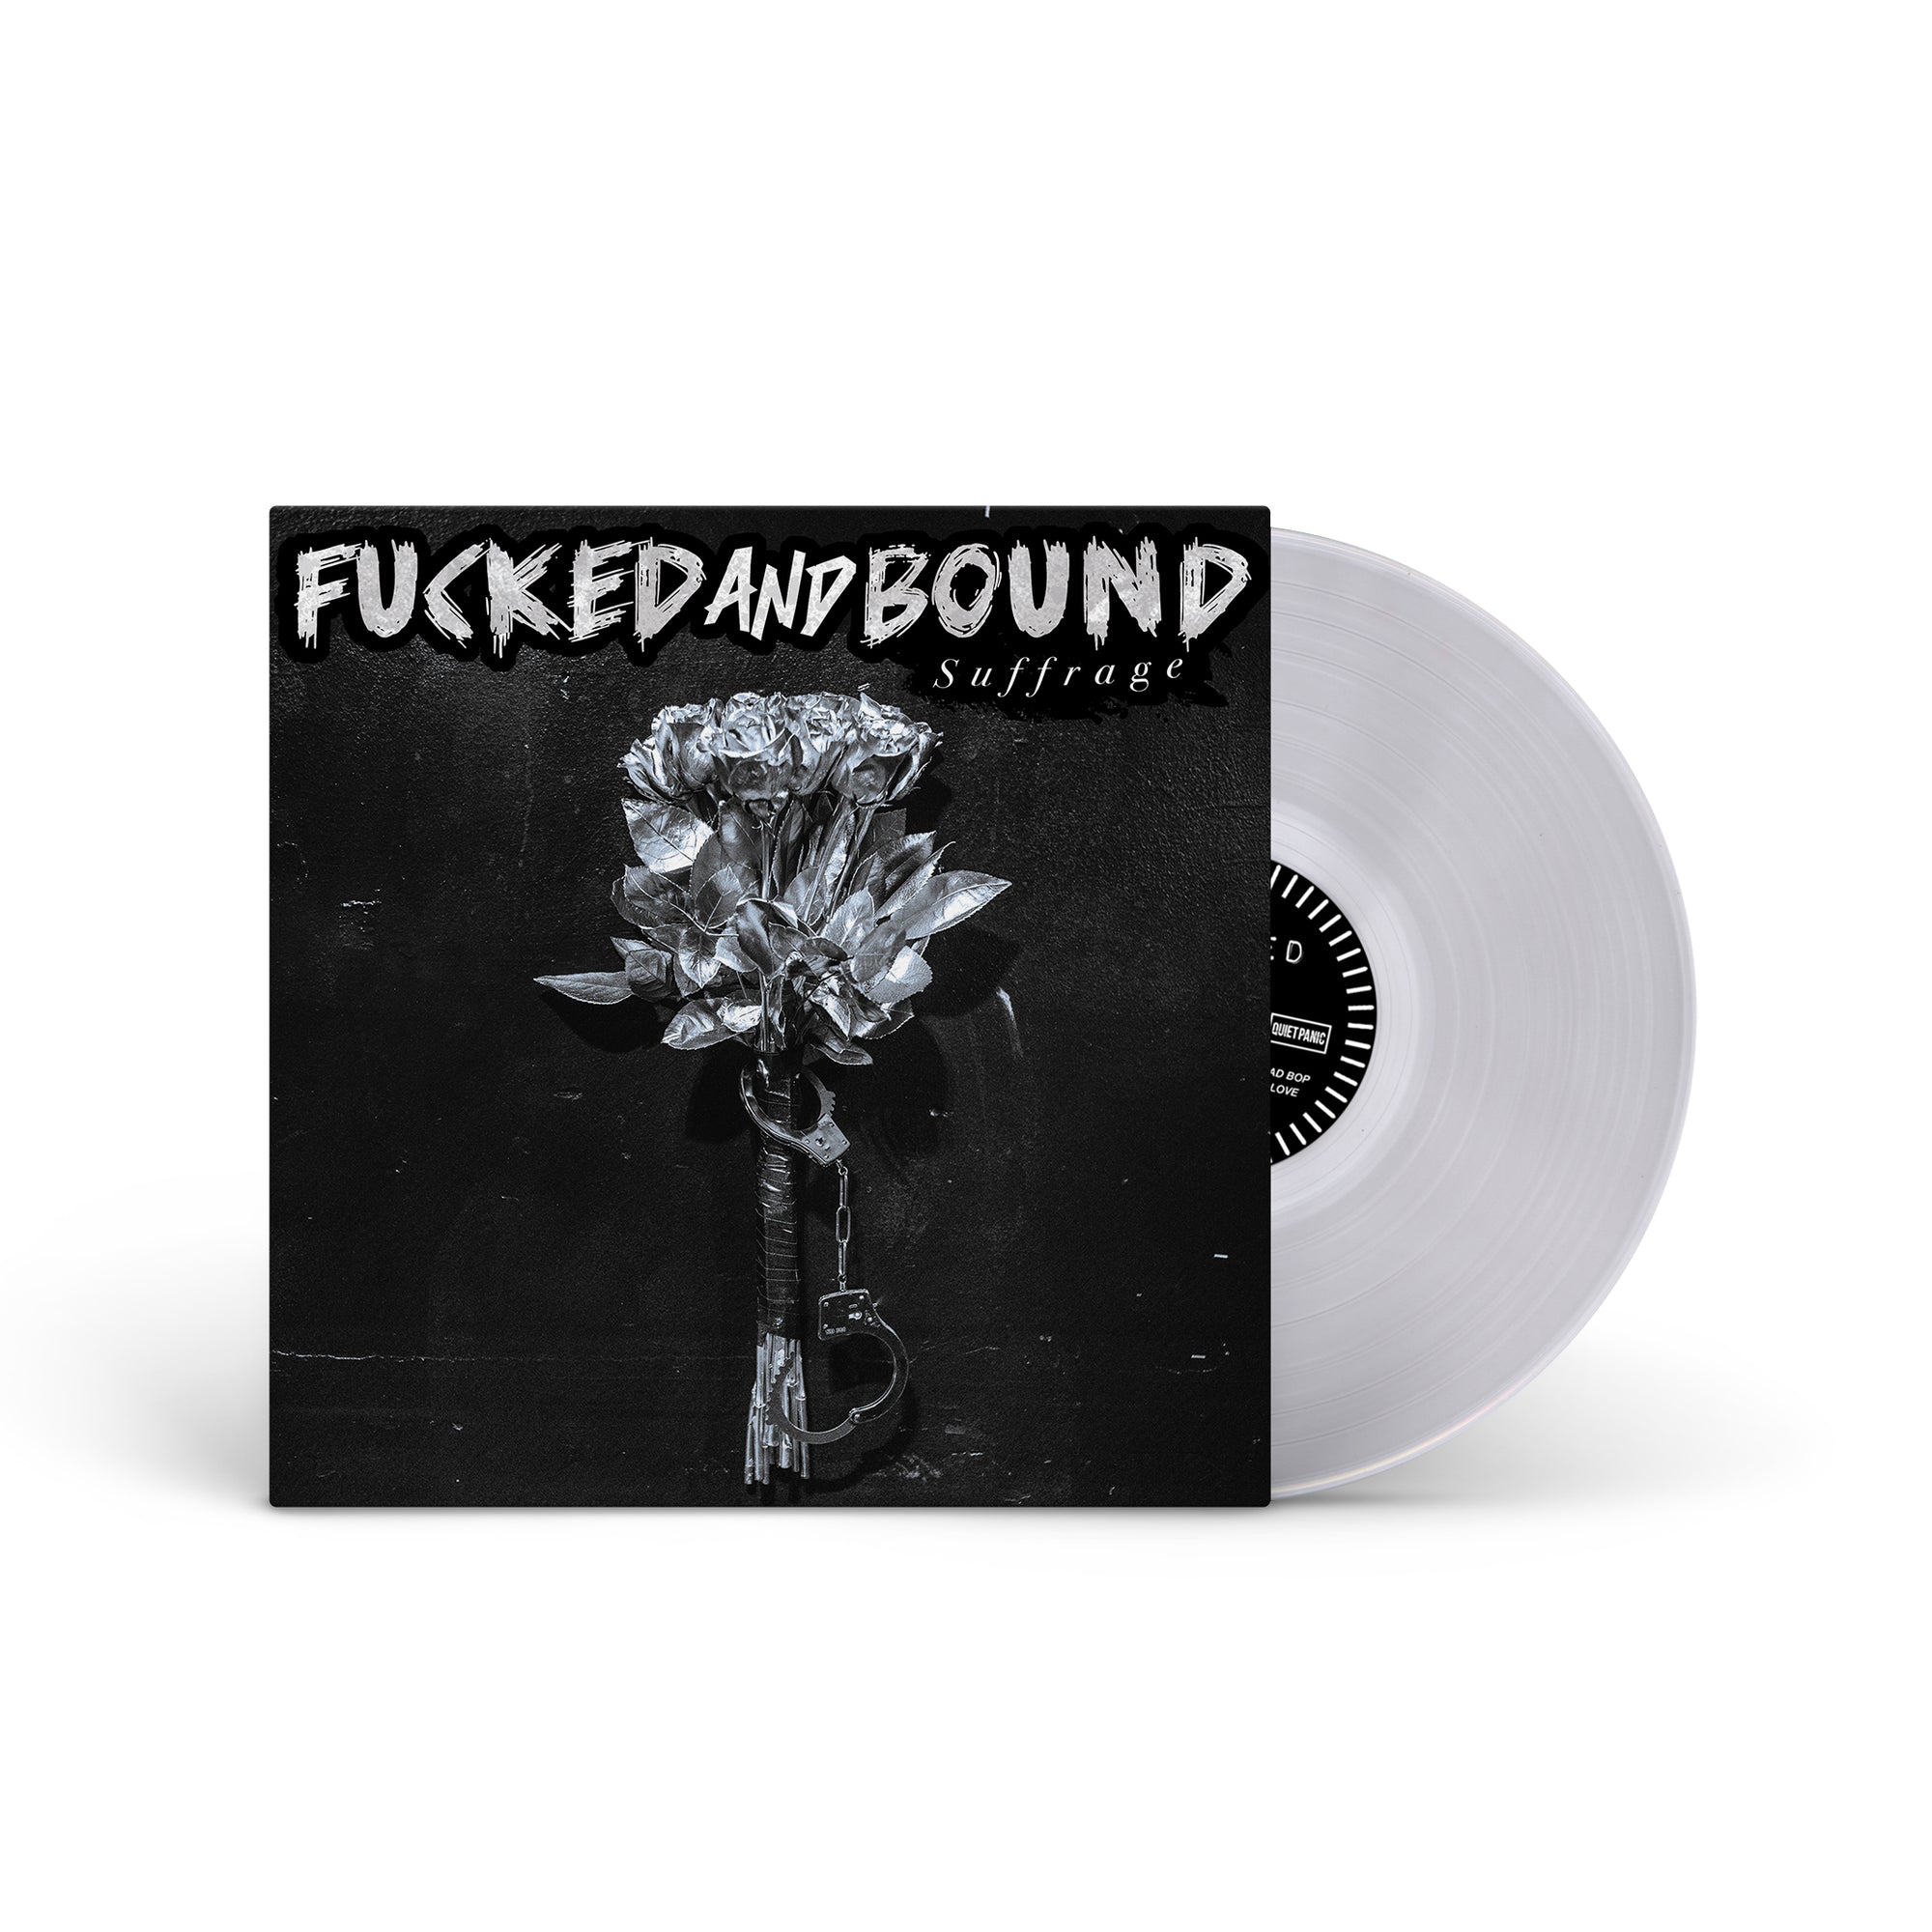 FUCKED AND BOUND "Suffrage" LP